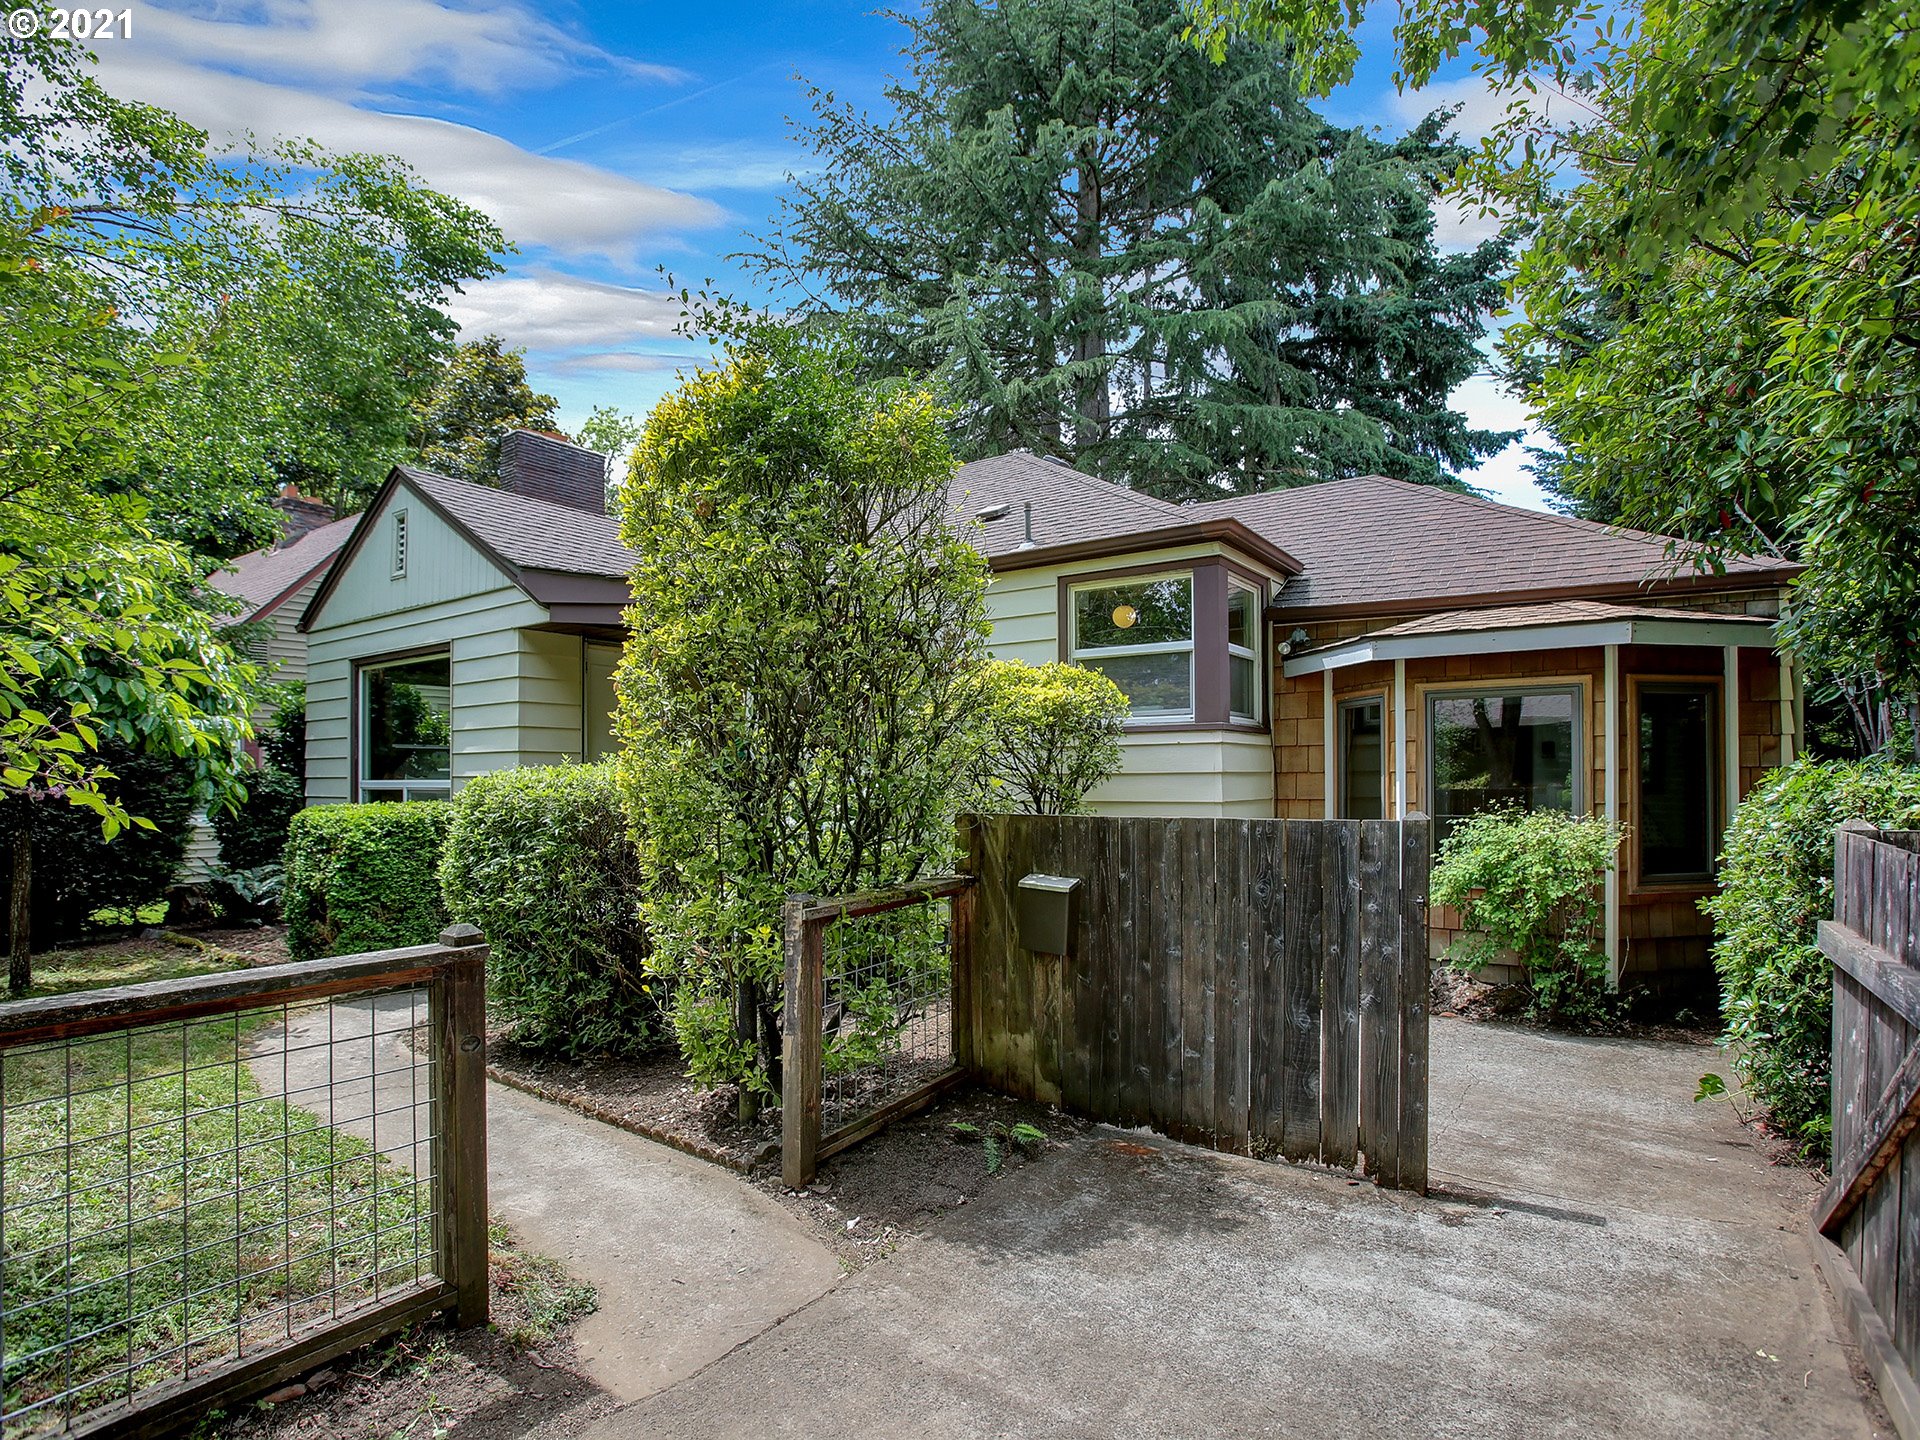 3221 SE 75TH AVE (1 of 21)